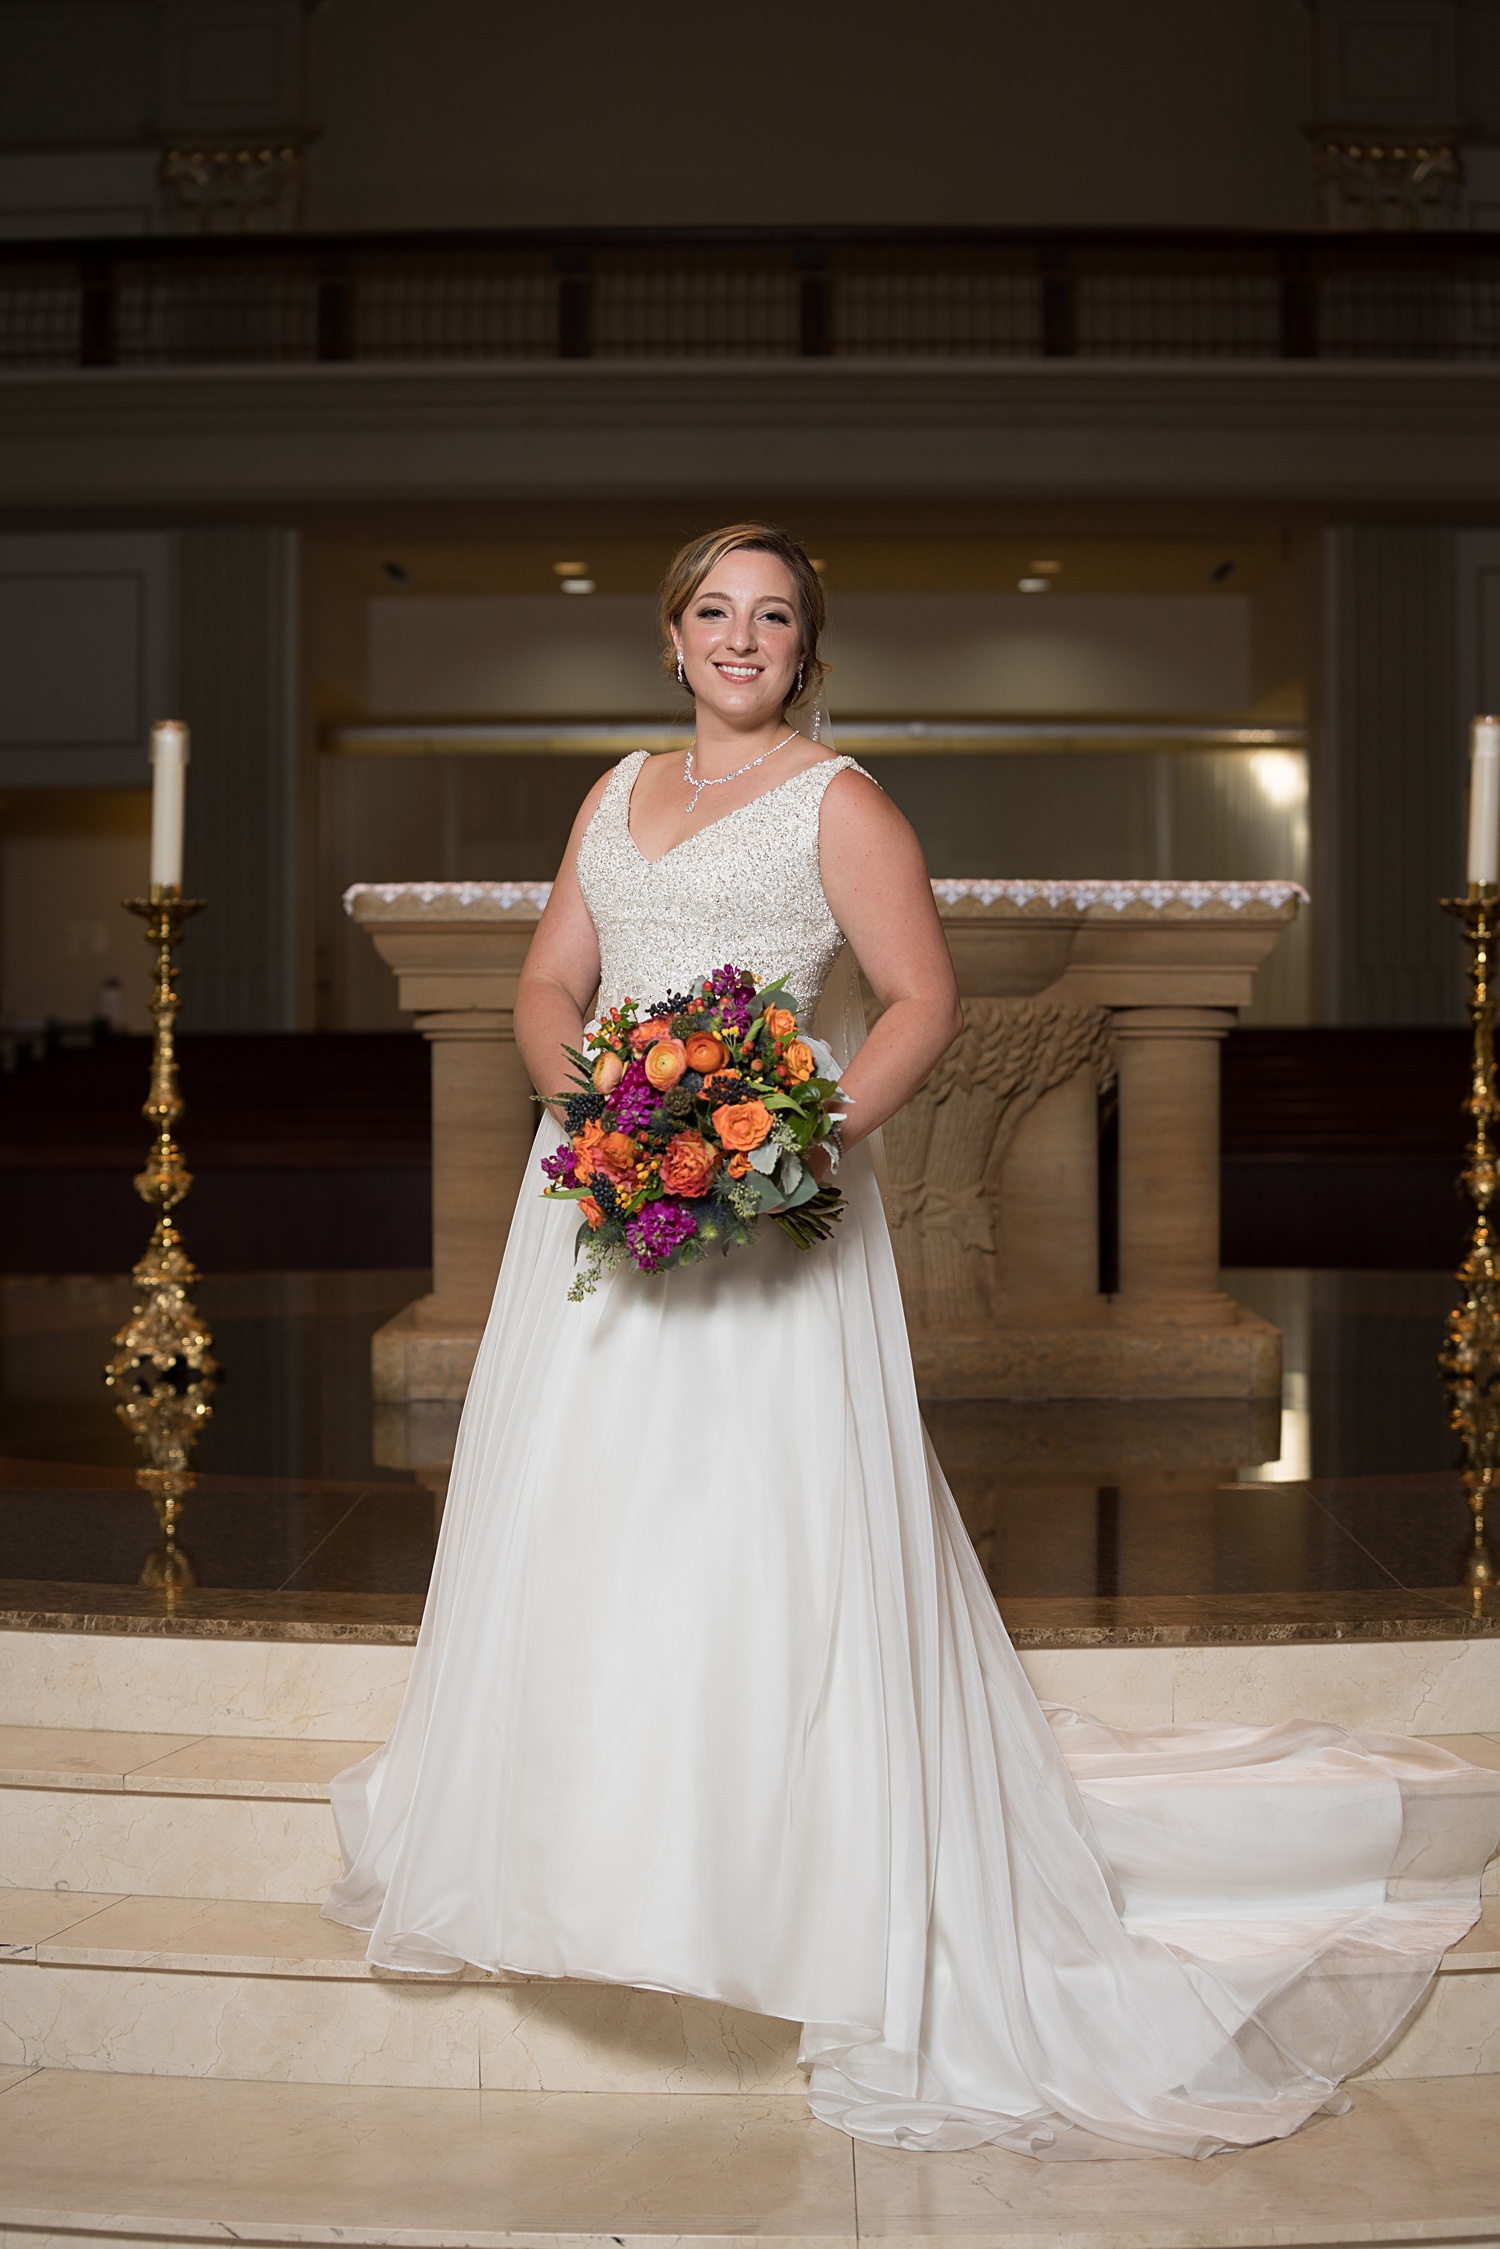 Cathedral of the Immaculate Conception Wedding KC-Wedding-Photographer-Emily-Lynn-Photography